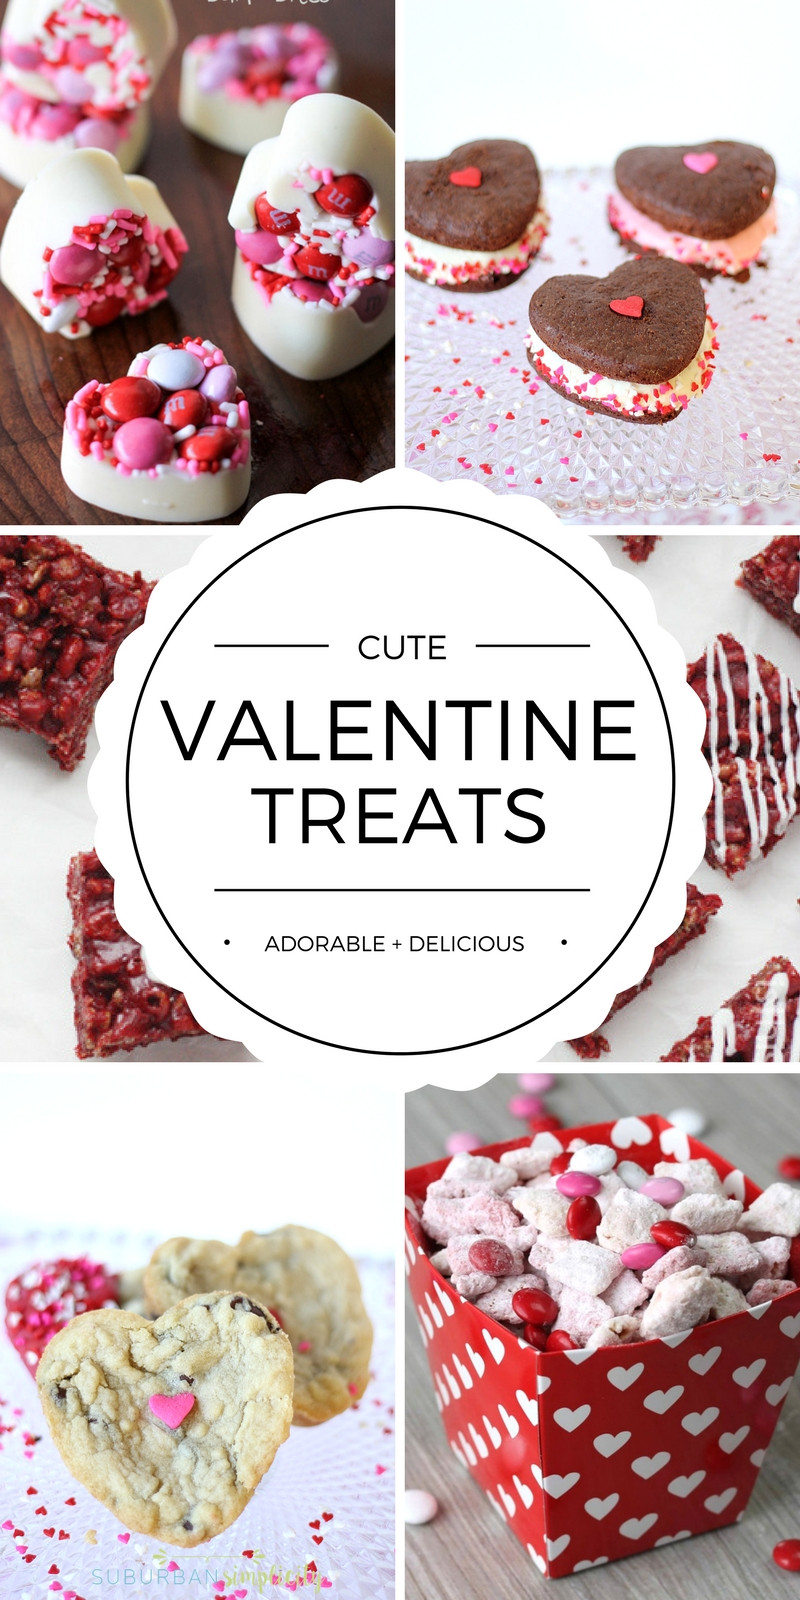 Valentines Day Pic Ideas
 Cute Valentine s Day Treat Ideas